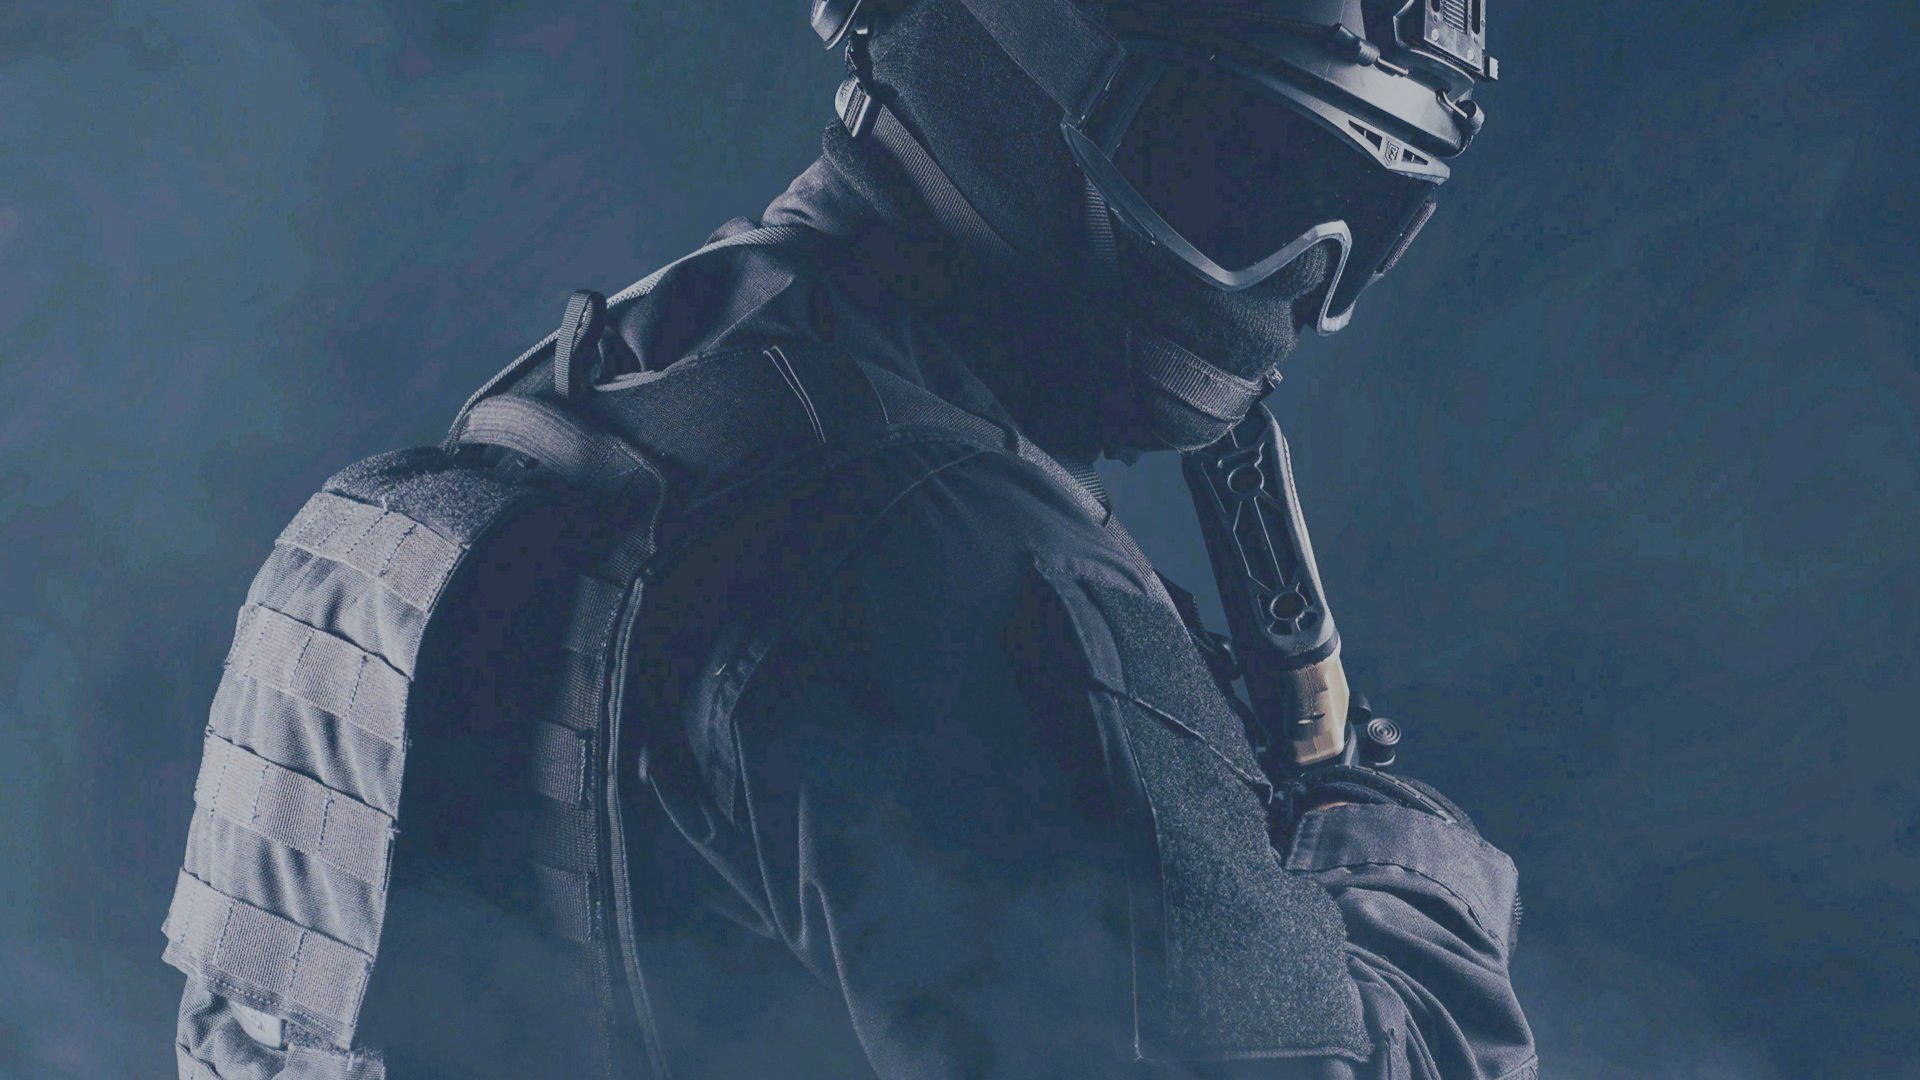 General 1920x1080 Rainbow Six Tom Clancy's video games PC gaming